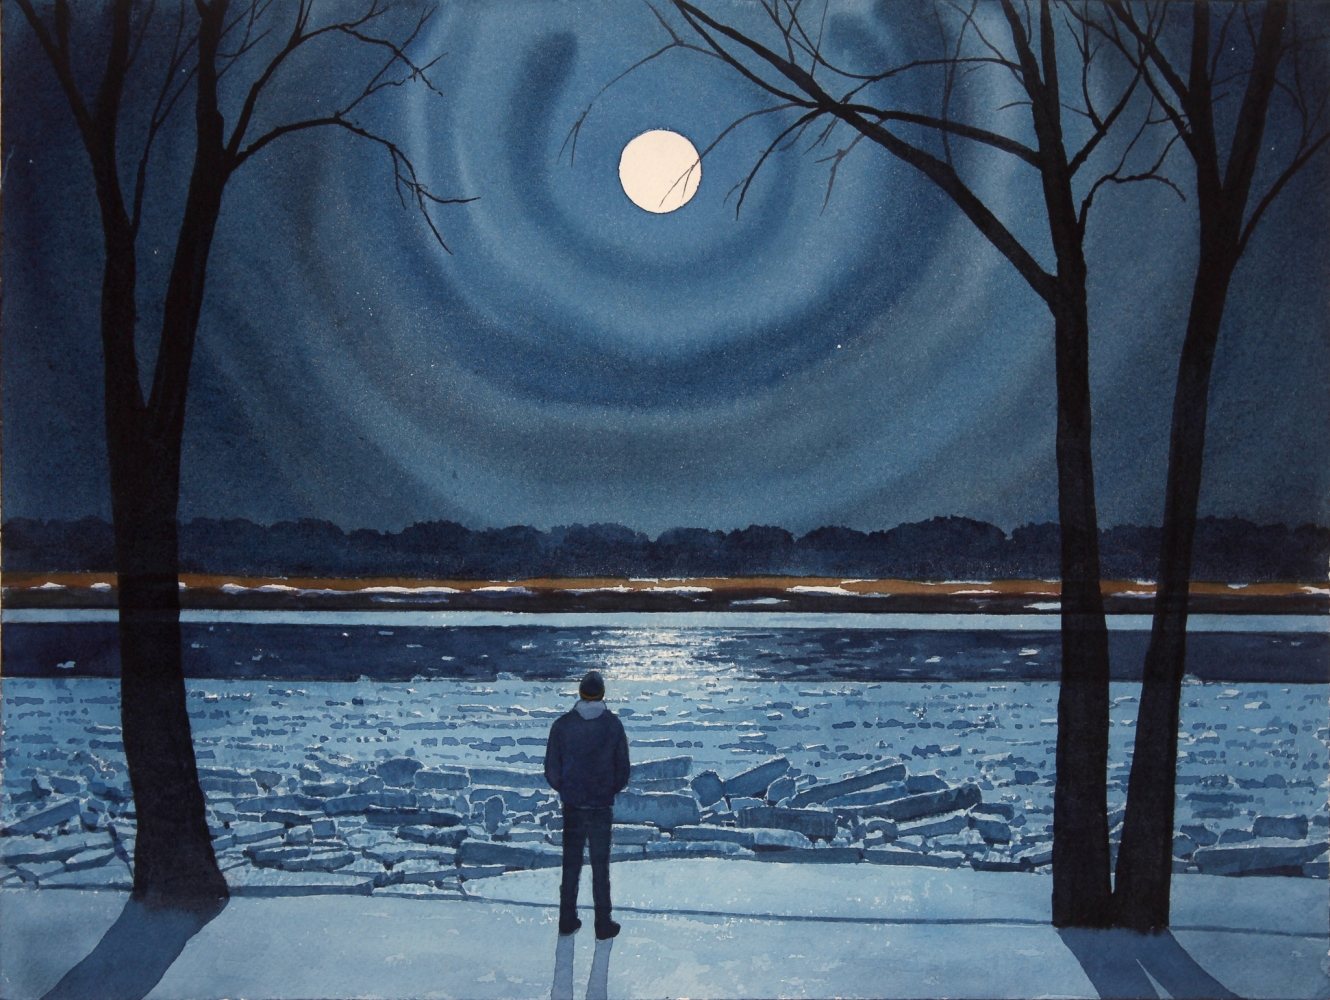 Tim Gardner

Man in Moonlight, Red River

2020

Watercolor on paper

12 1/8&amp;nbsp; x 16 1/8 inches (30.8 x 41 cm)

TG 591

&amp;nbsp;

INQUIRE